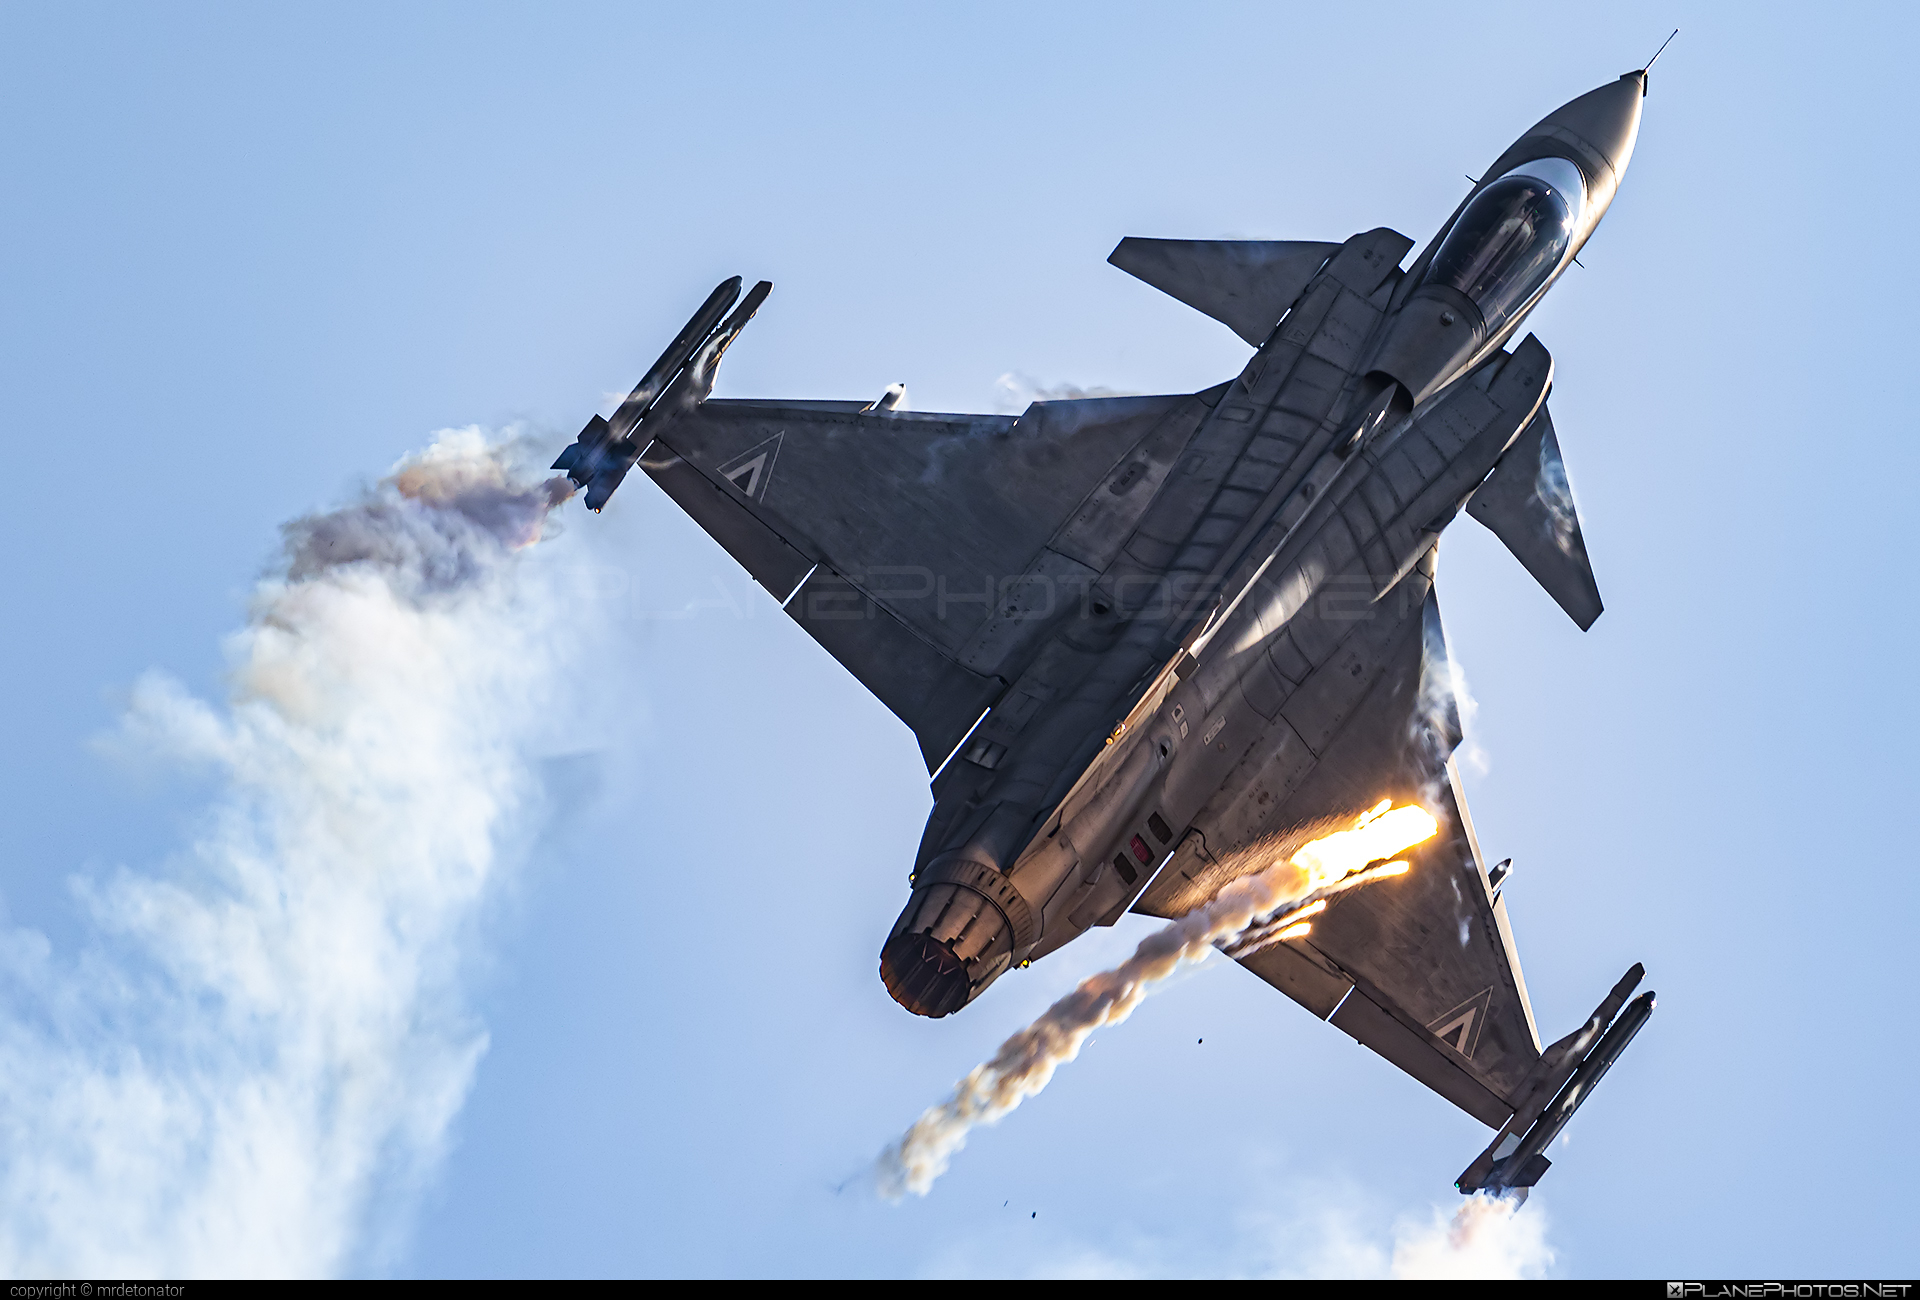 Saab JAS 39C Gripen - 33 operated by Magyar Légierő (Hungarian Air Force) #gripen #hungarianairforce #jas39 #jas39c #jas39gripen #magyarlegiero #saab #siaf2021